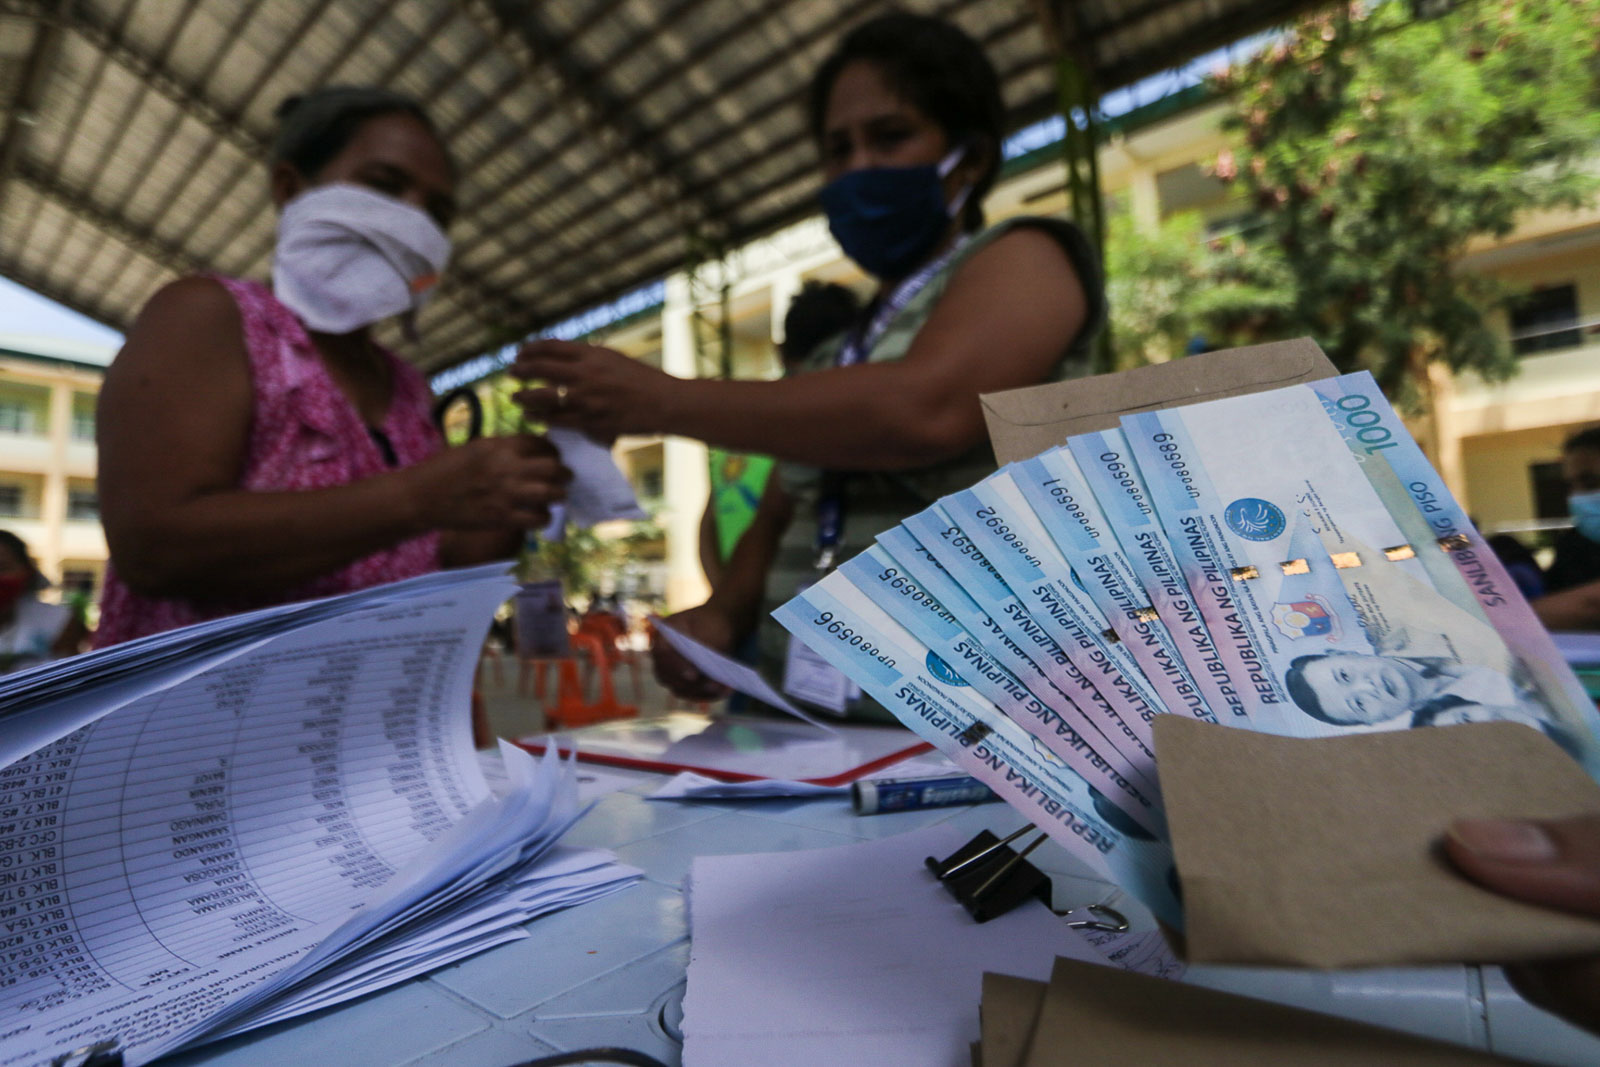 SUBSIDY WOES. Residents of Baseco Compound wait in line for their financial assistance from the government's emergency subsidy program distributed by the DSWD on May 2, 2020. File photo by KD Madrilejos/Rappler   